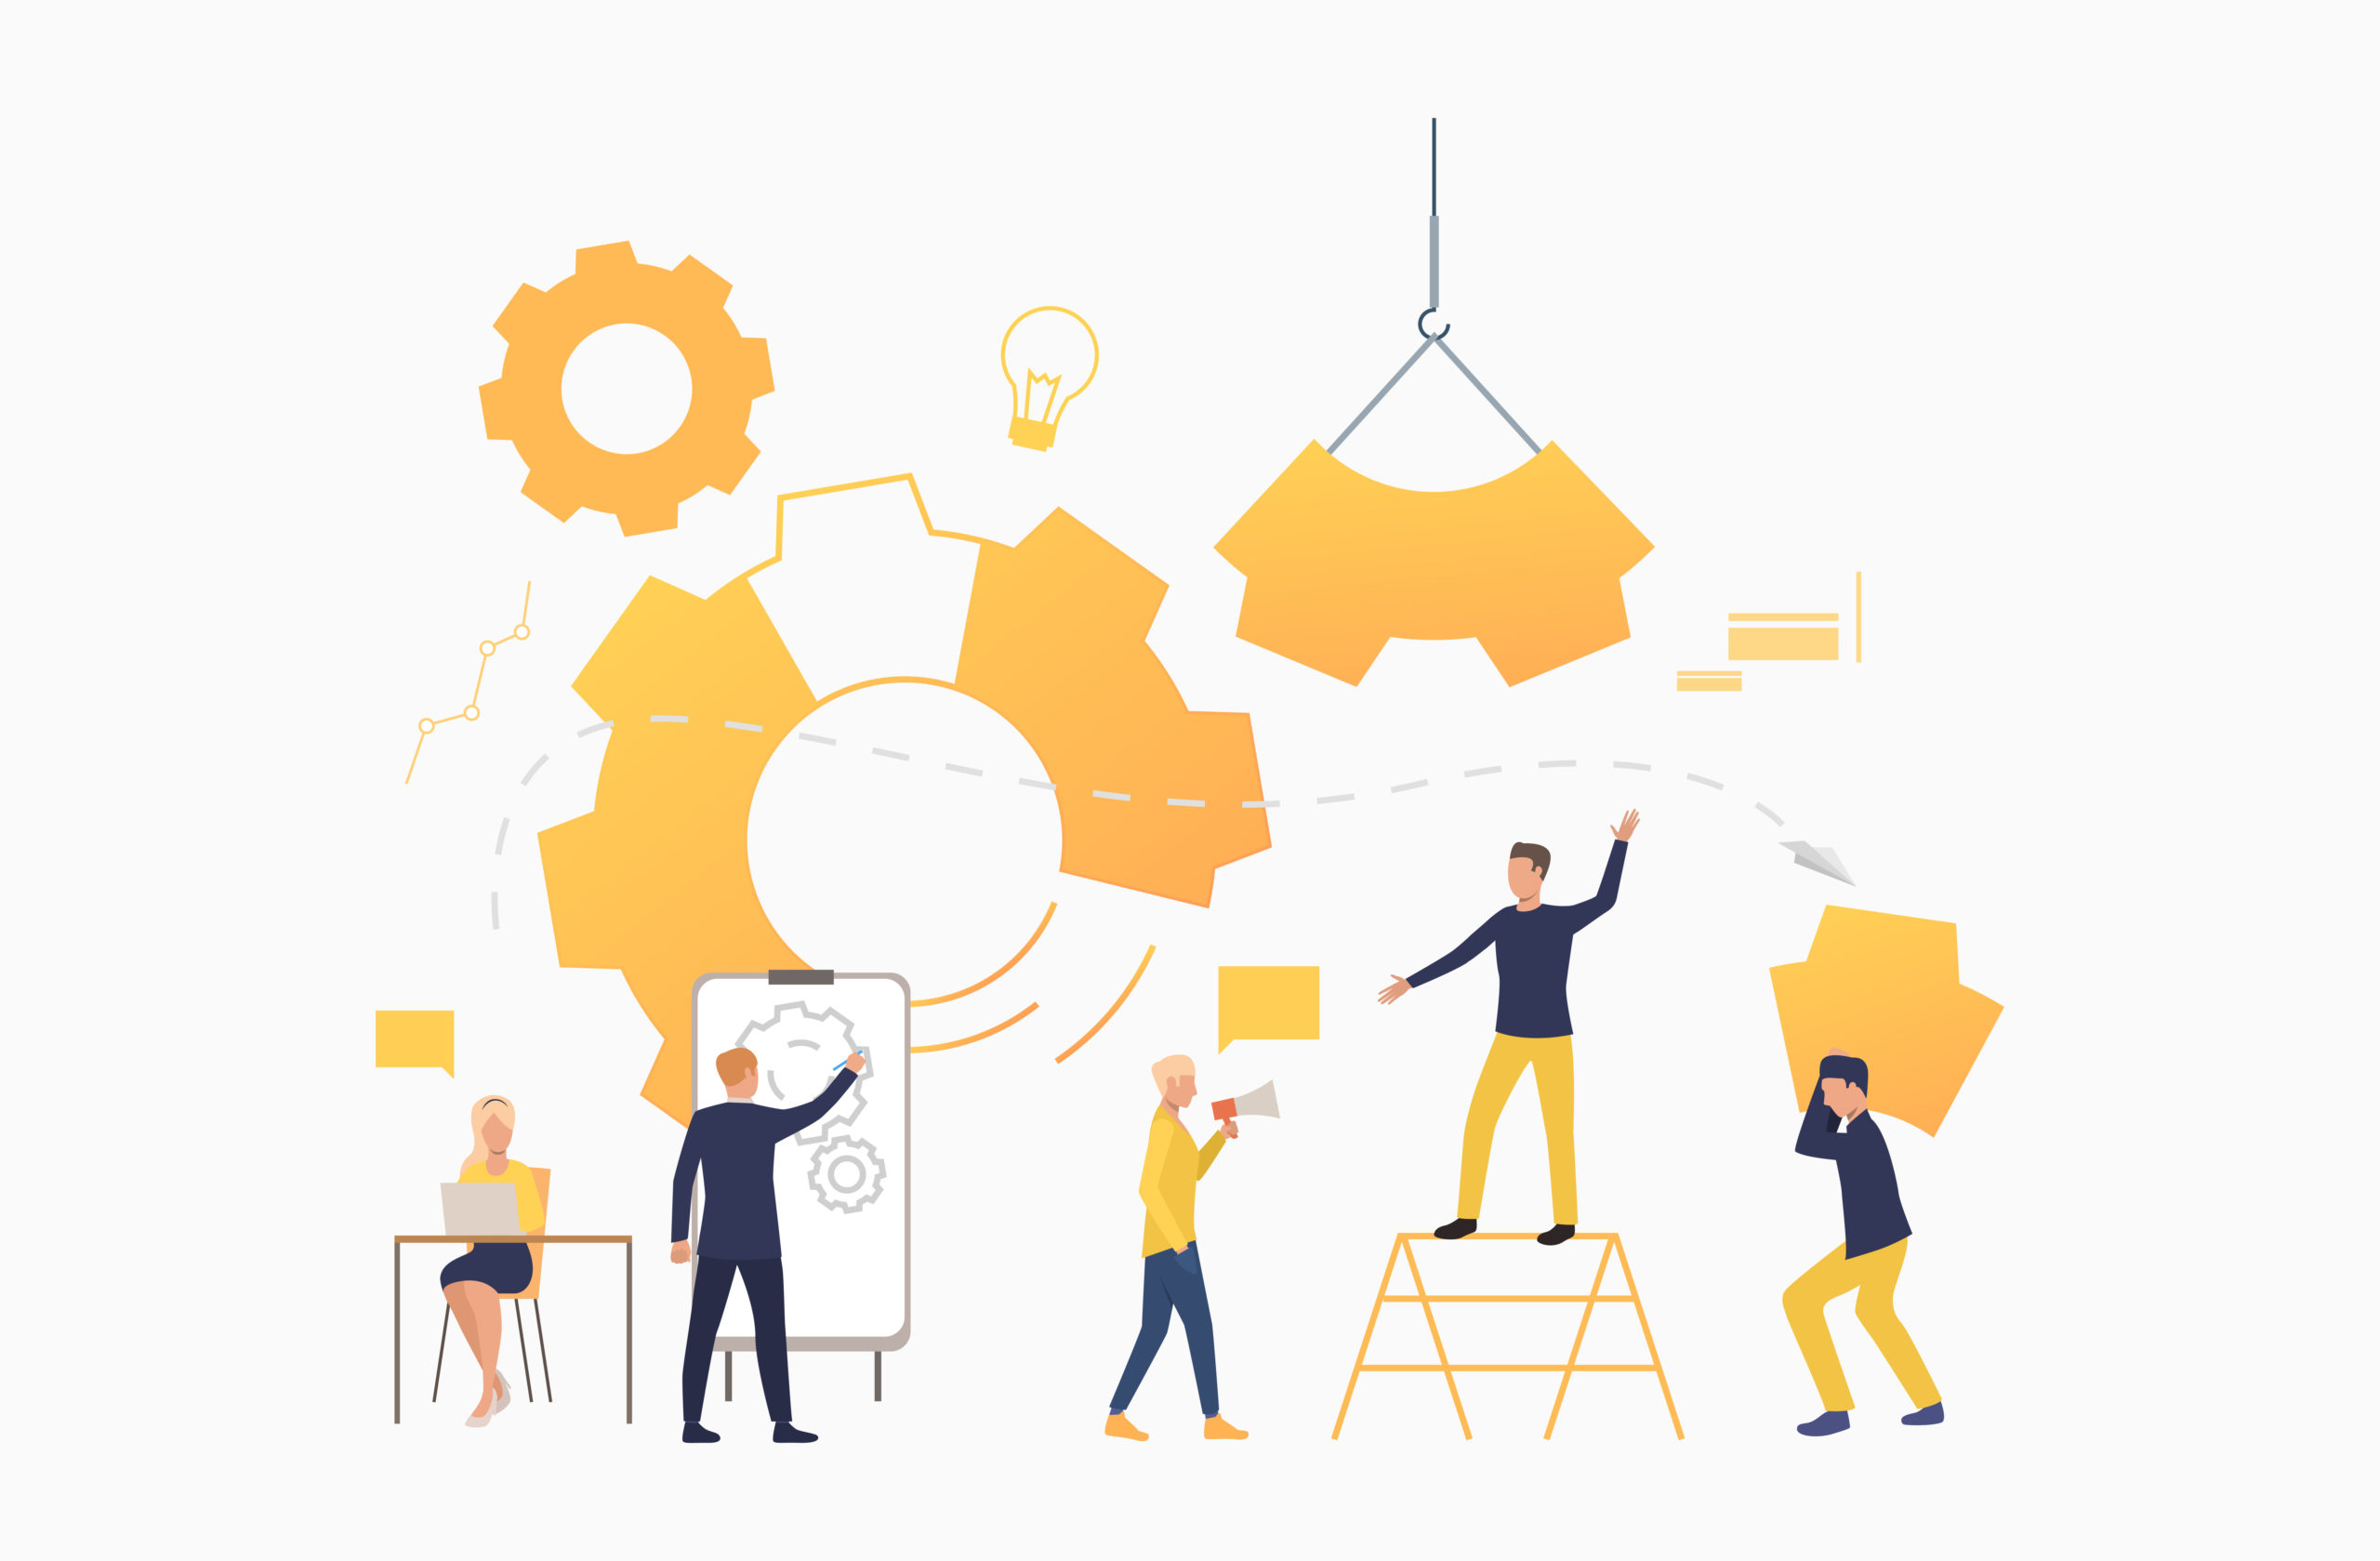 Business team working as mechanism. Operation, teamwork, brainstorming. Management concept. Vector illustration can be used for presentation slide, posters, banners